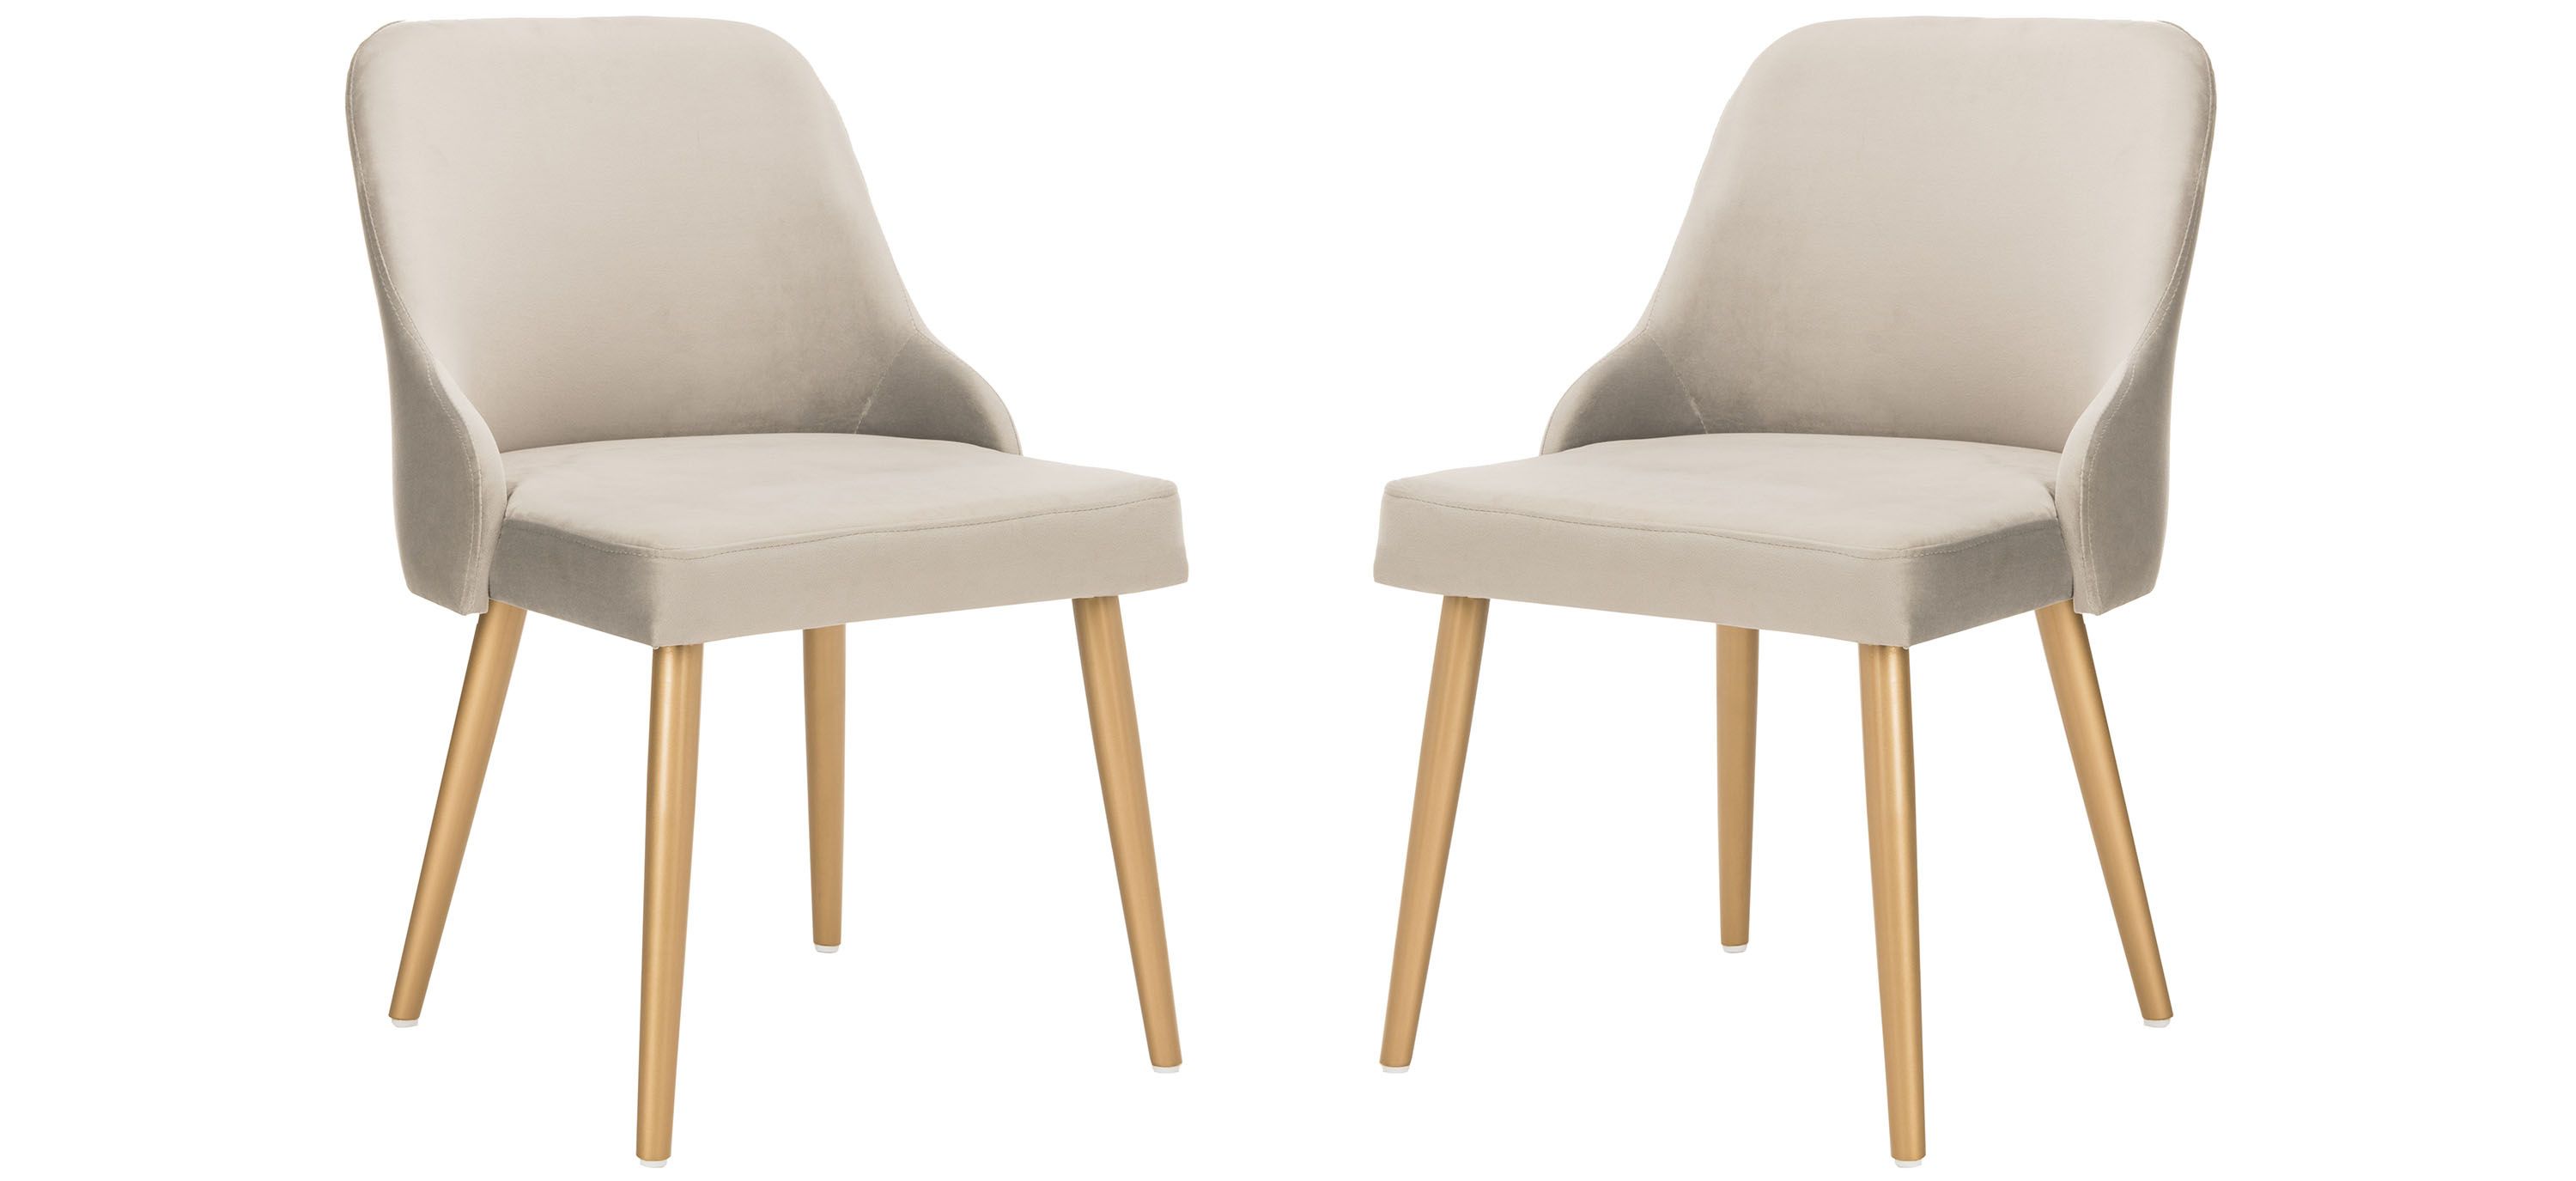 Patty Dining Chair - Set of 2